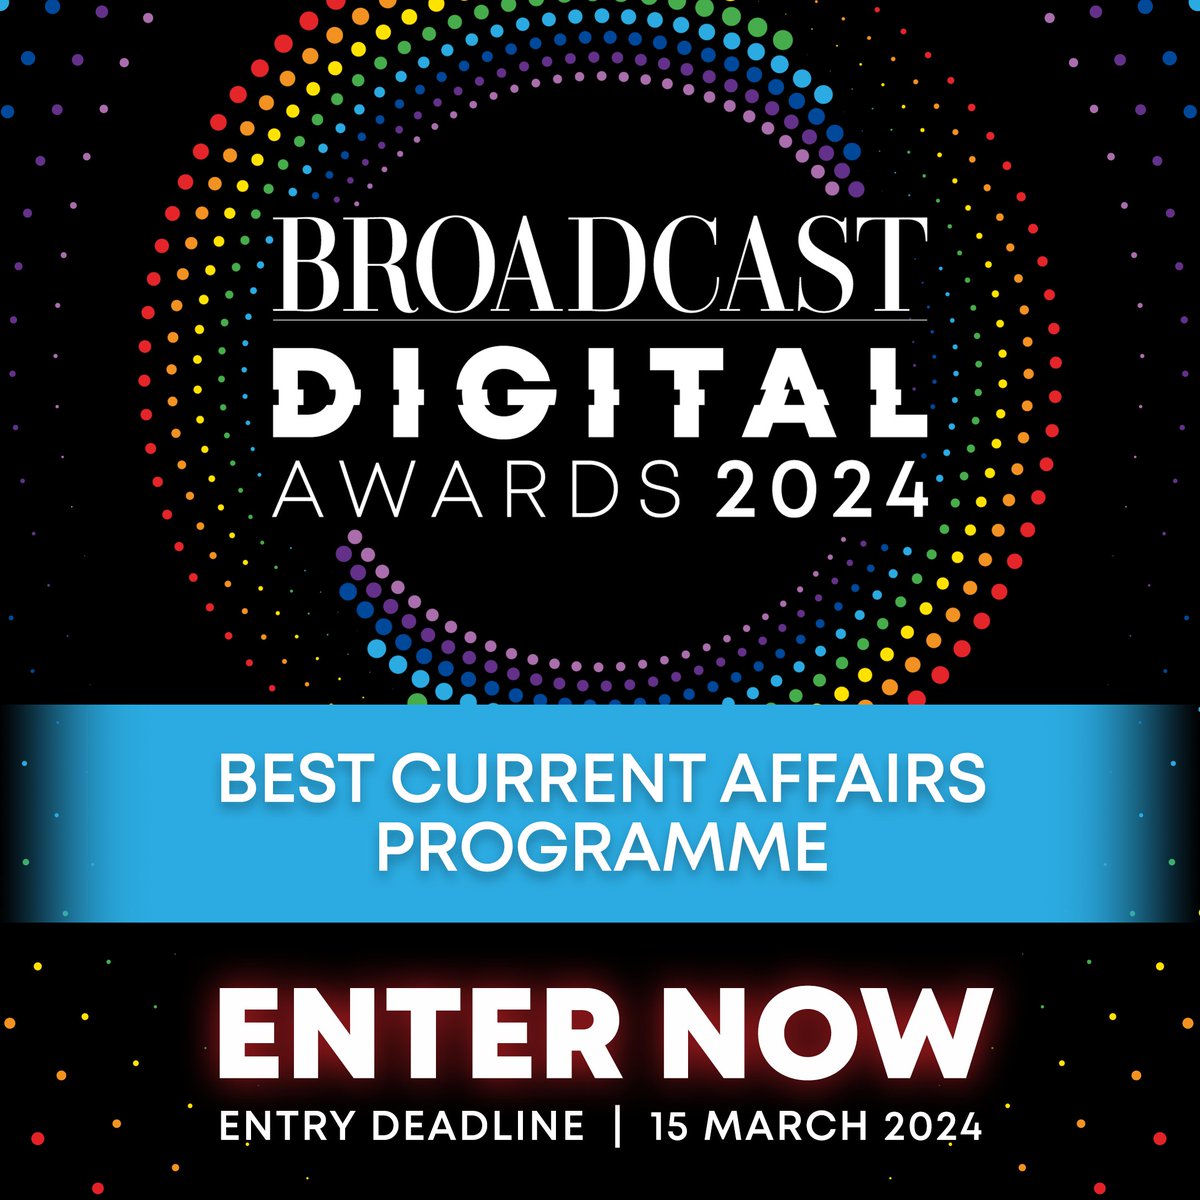 The #BroadcastDigitalAward for Best Current Affairs Programme will reward high quality, talked-about programme that has made their mark. Enter now: bit.ly/BDA24Enter #BDA2024